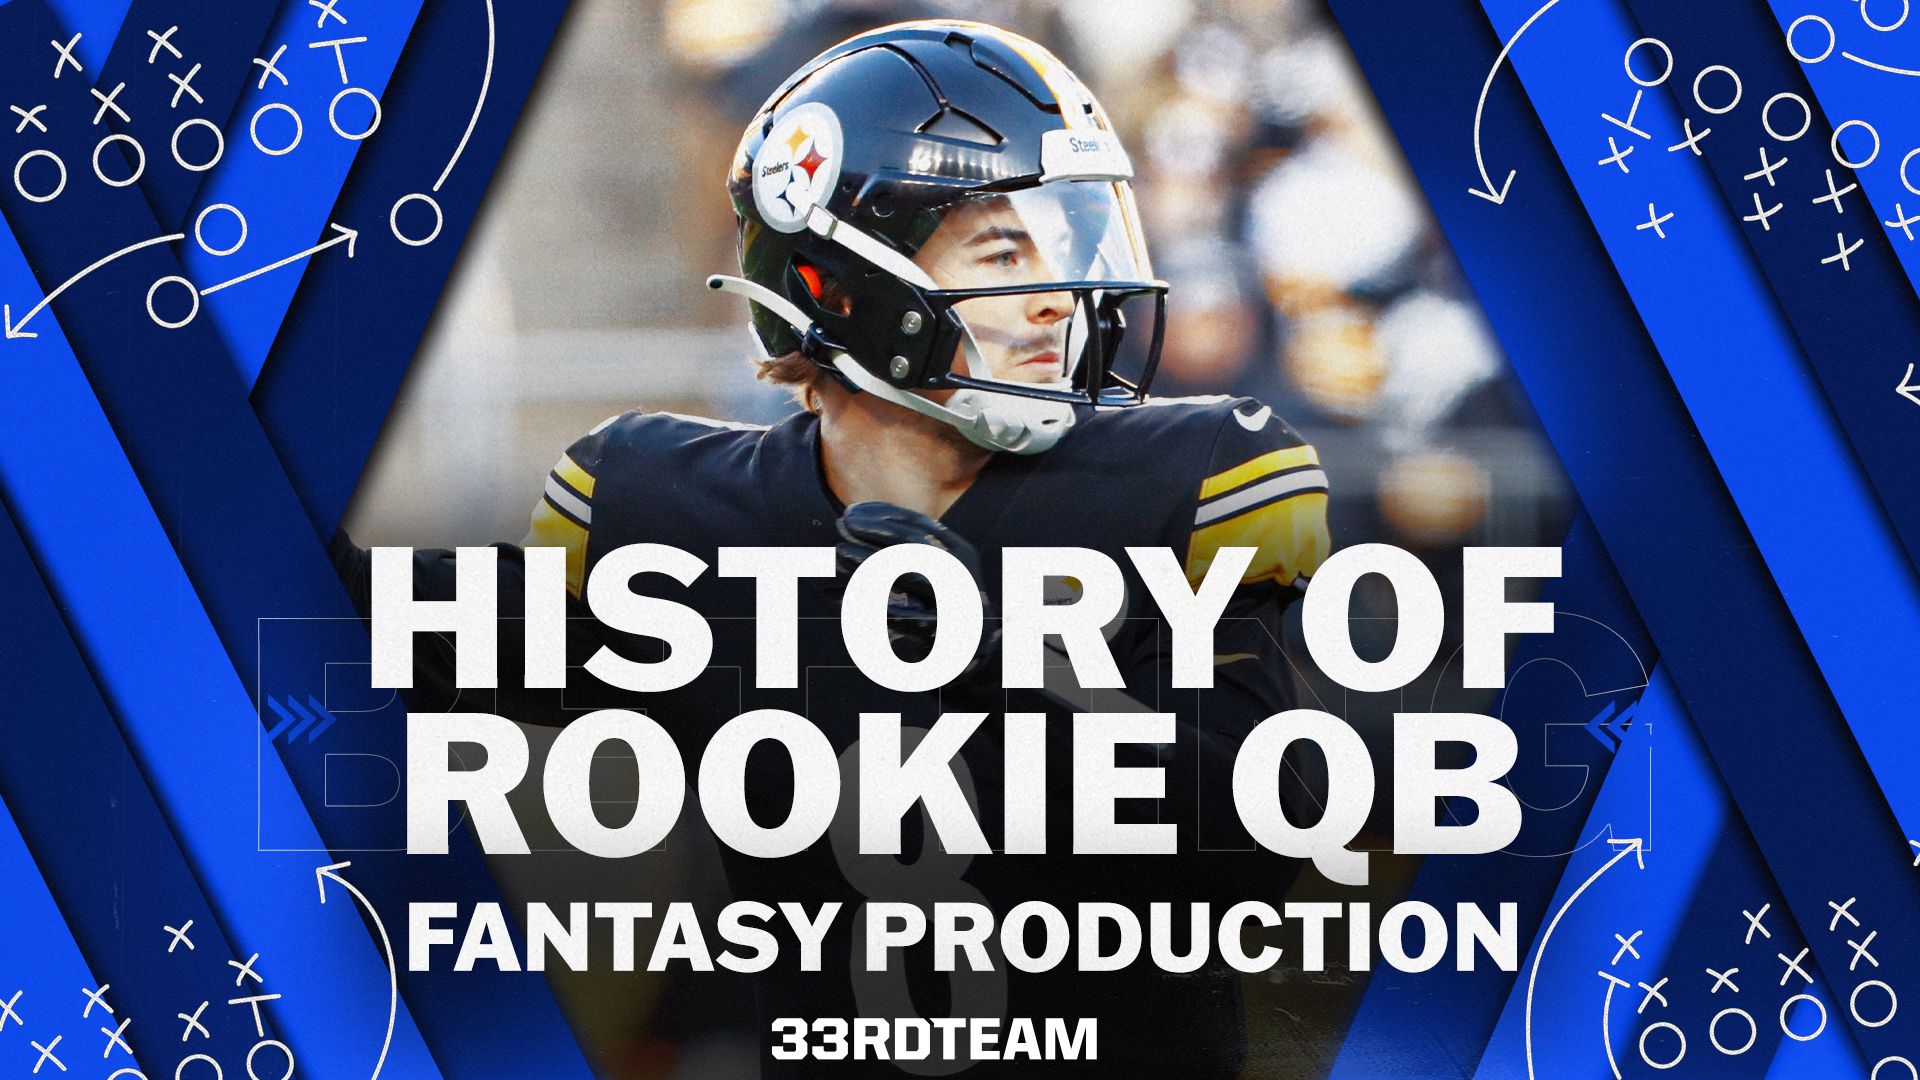 2023 Fantasy Football: Analyzing Rookie QBs Based on Draft Capital